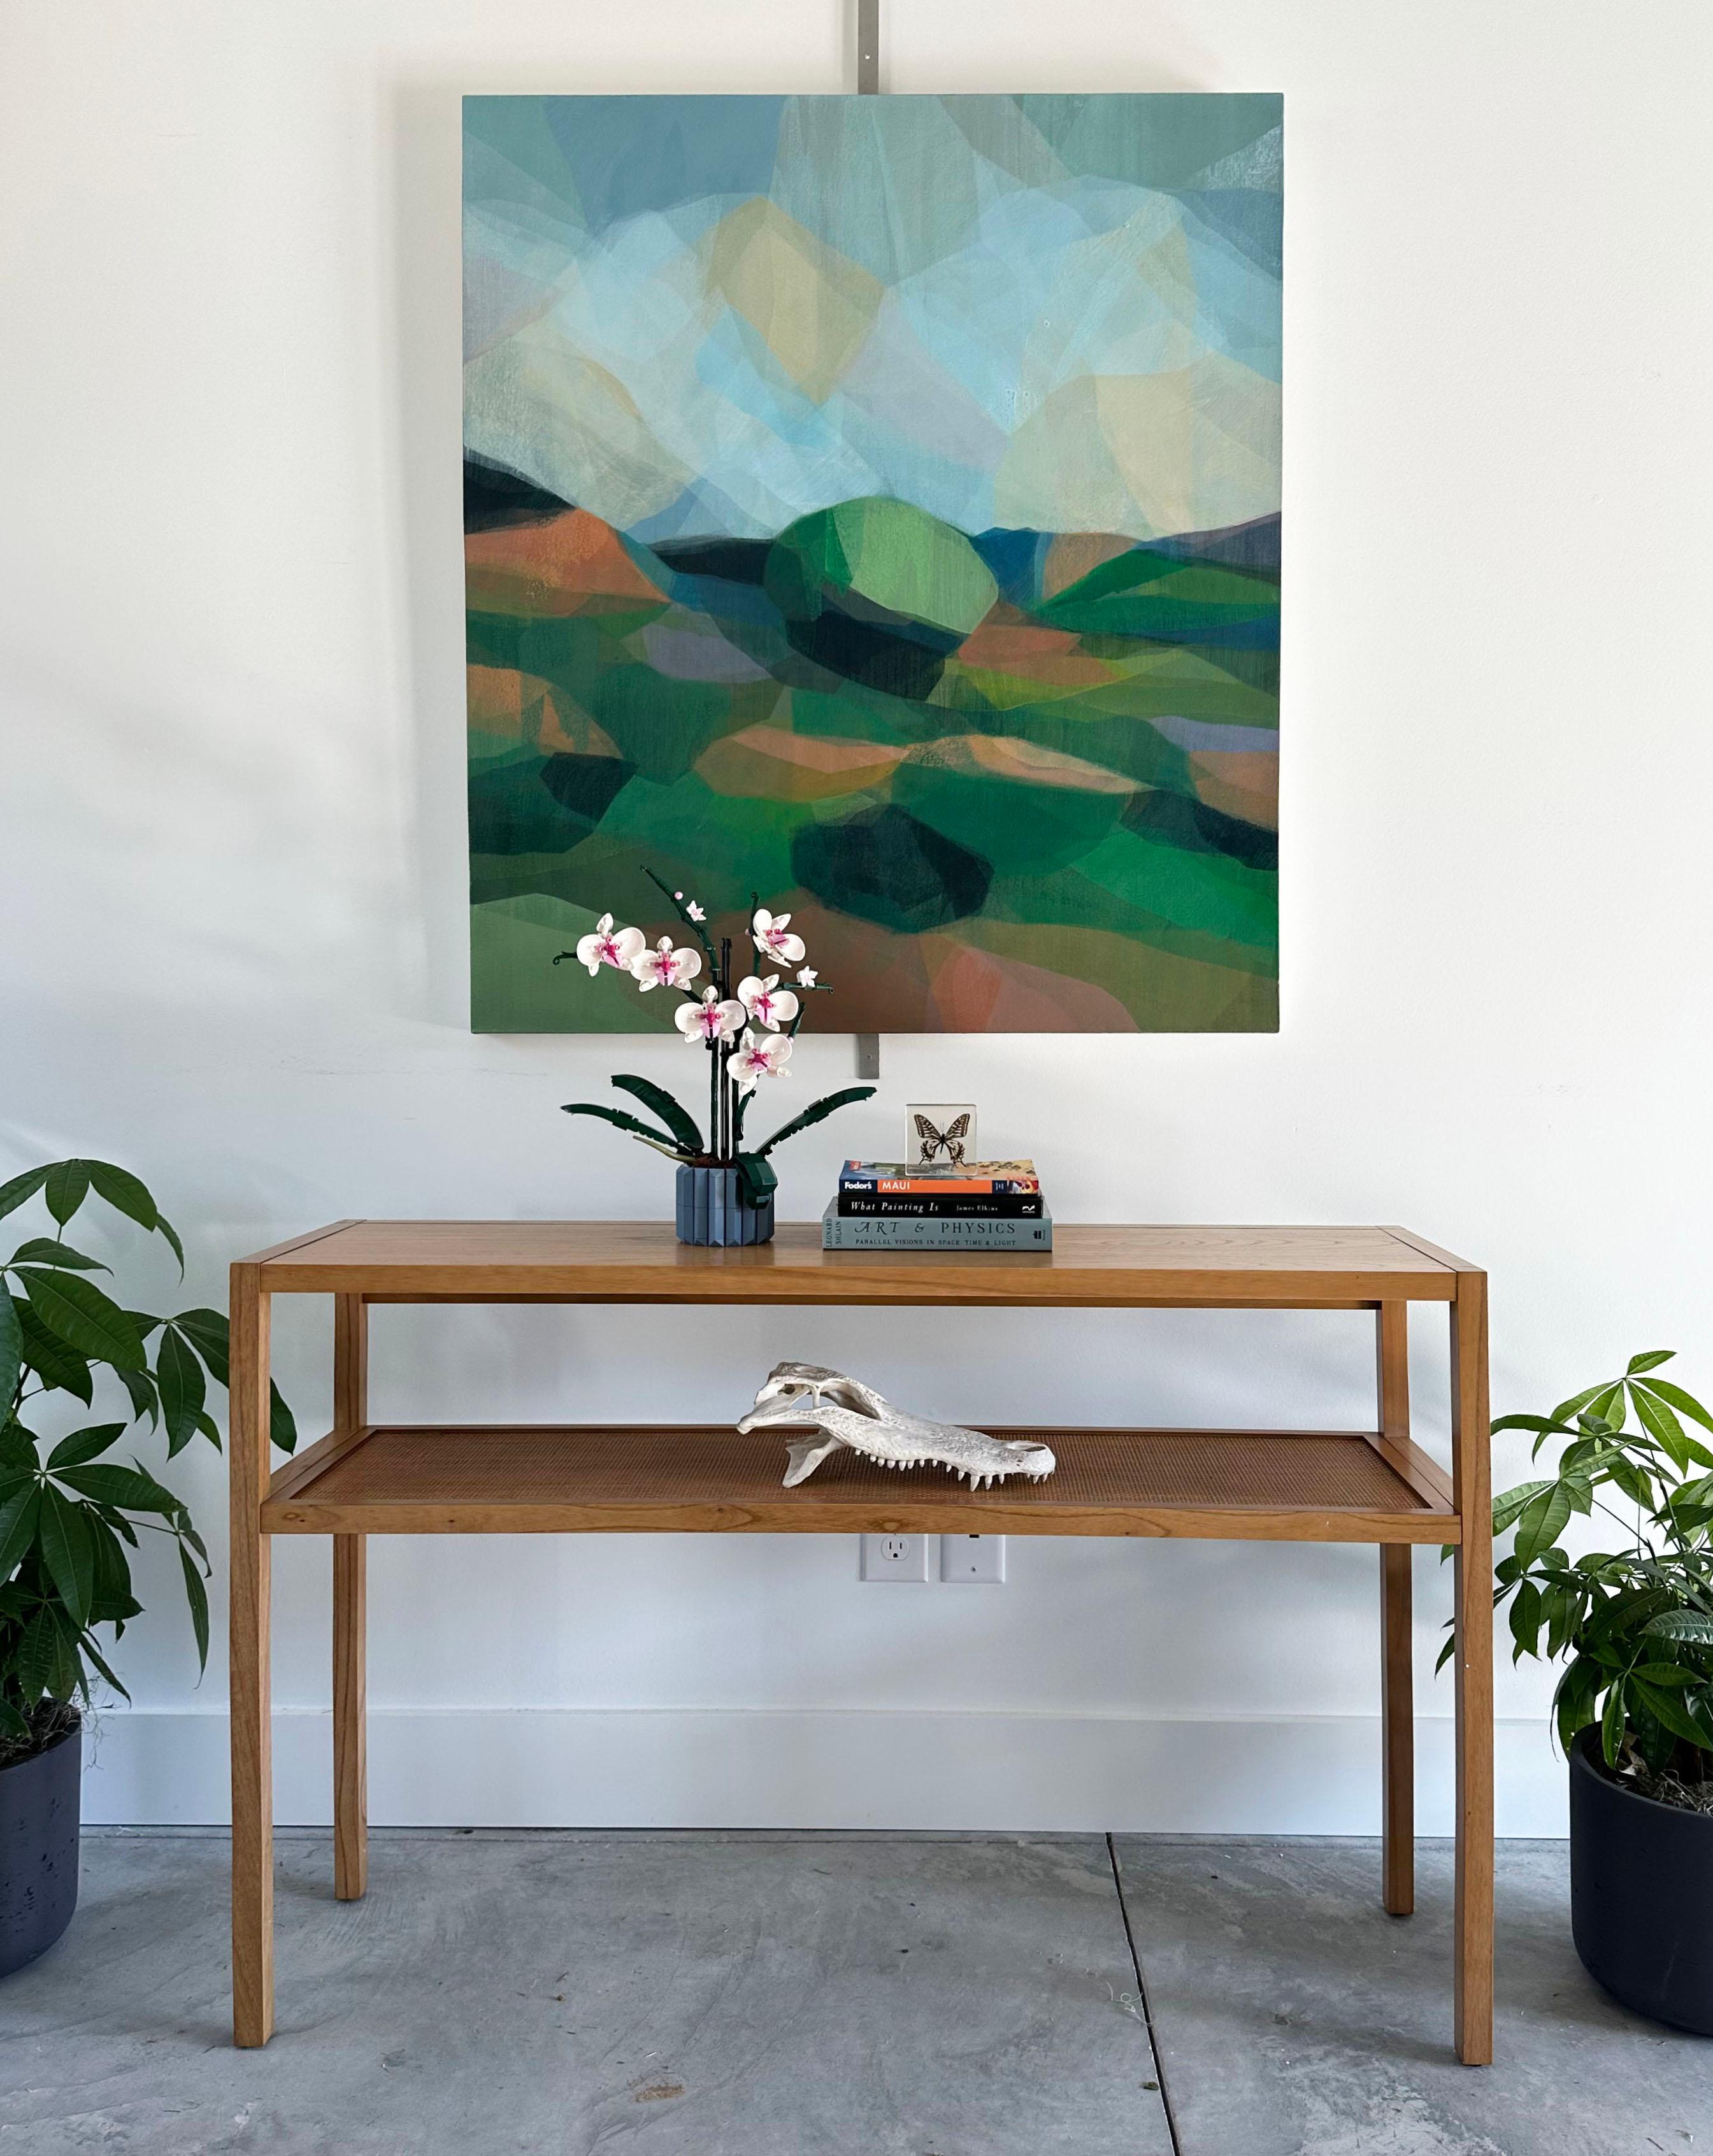 This painting is an abstract landscape on canvas featuring vibrant layers of blue, green, pink and yellow.

Katherine Sandoz is inspired by the work of Helen Frankenthaler, Richard Diebenkorn, Morris Louis, Vincent Van Gogh, Willem de Kooning,